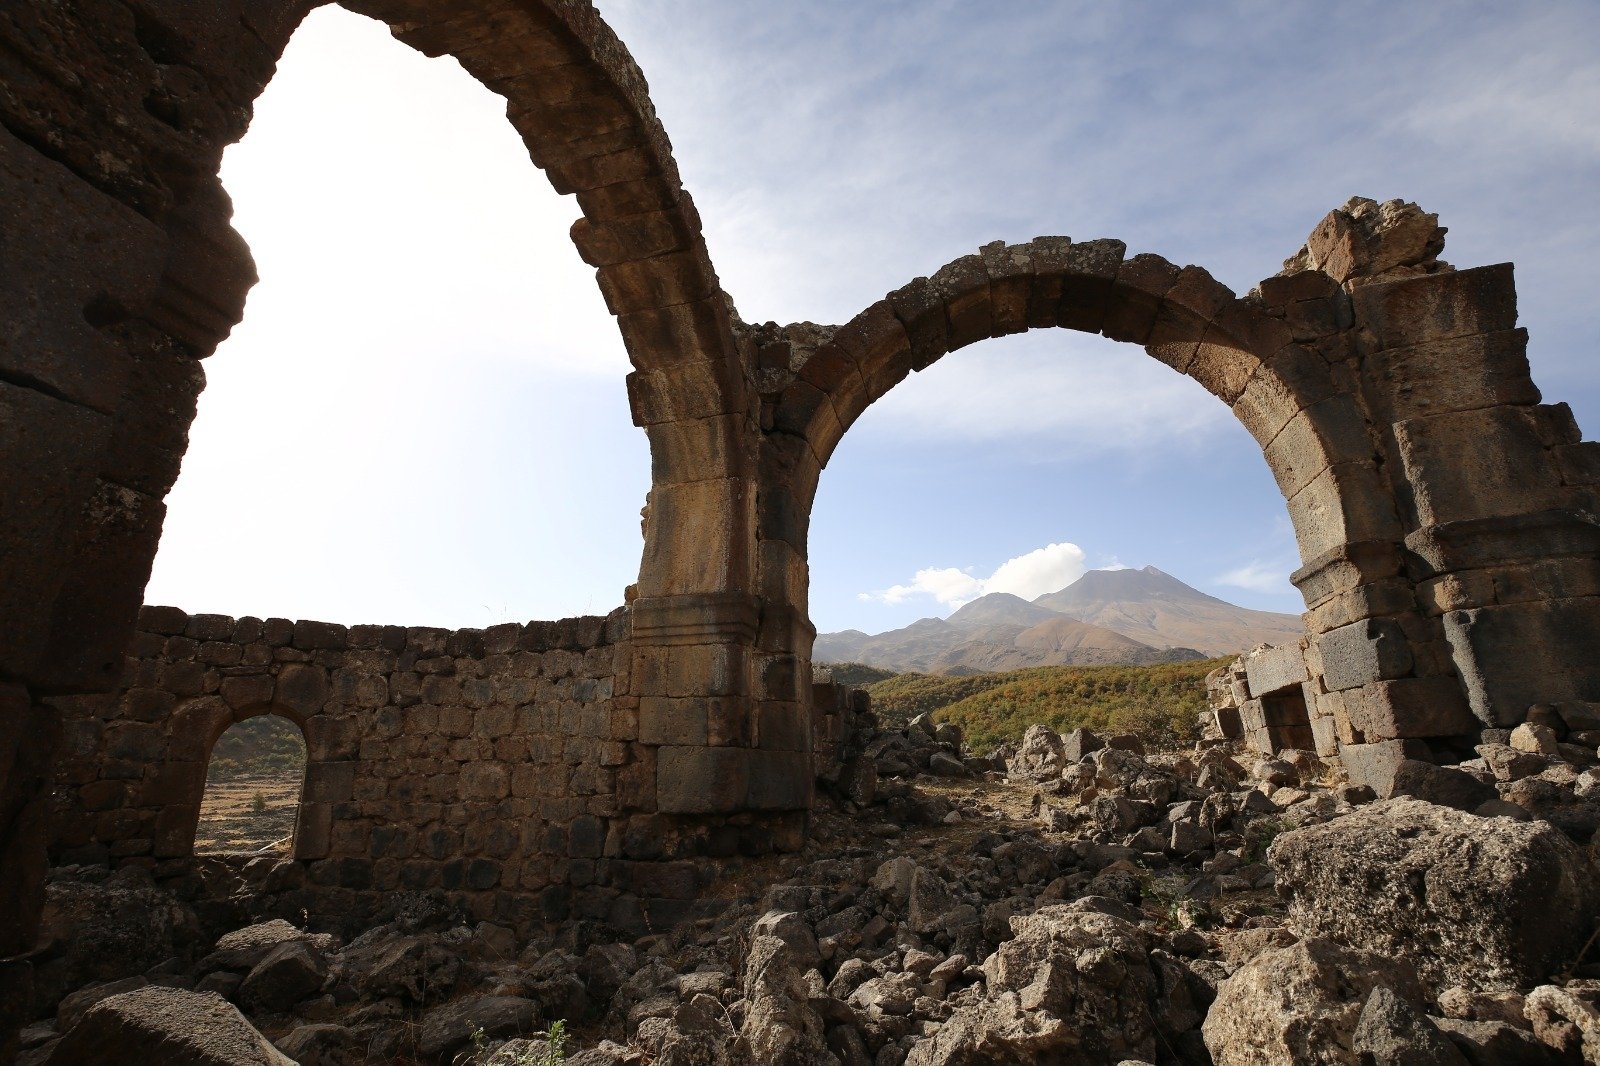 Gateway arches are seen in the ancient city of Nora, Aksaray, central Turkey, Oct. 21, 2020. (DHA PHOTO)